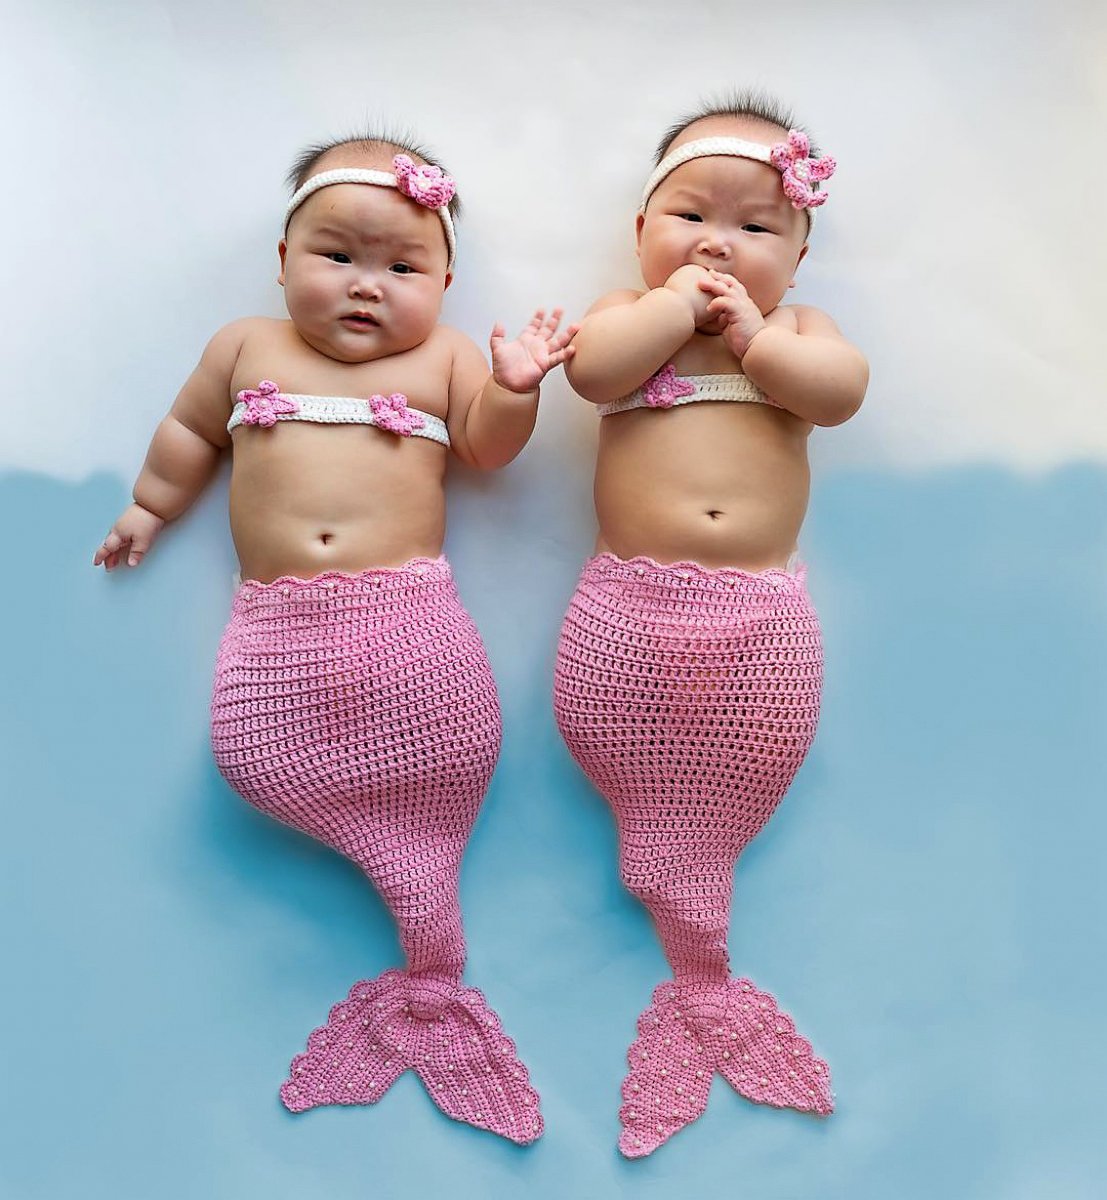 PHOTO: Leia and Lauren Lok, 8-month-old twins from Singapore, have 166 Instagram followers for their colorful, creative poses.